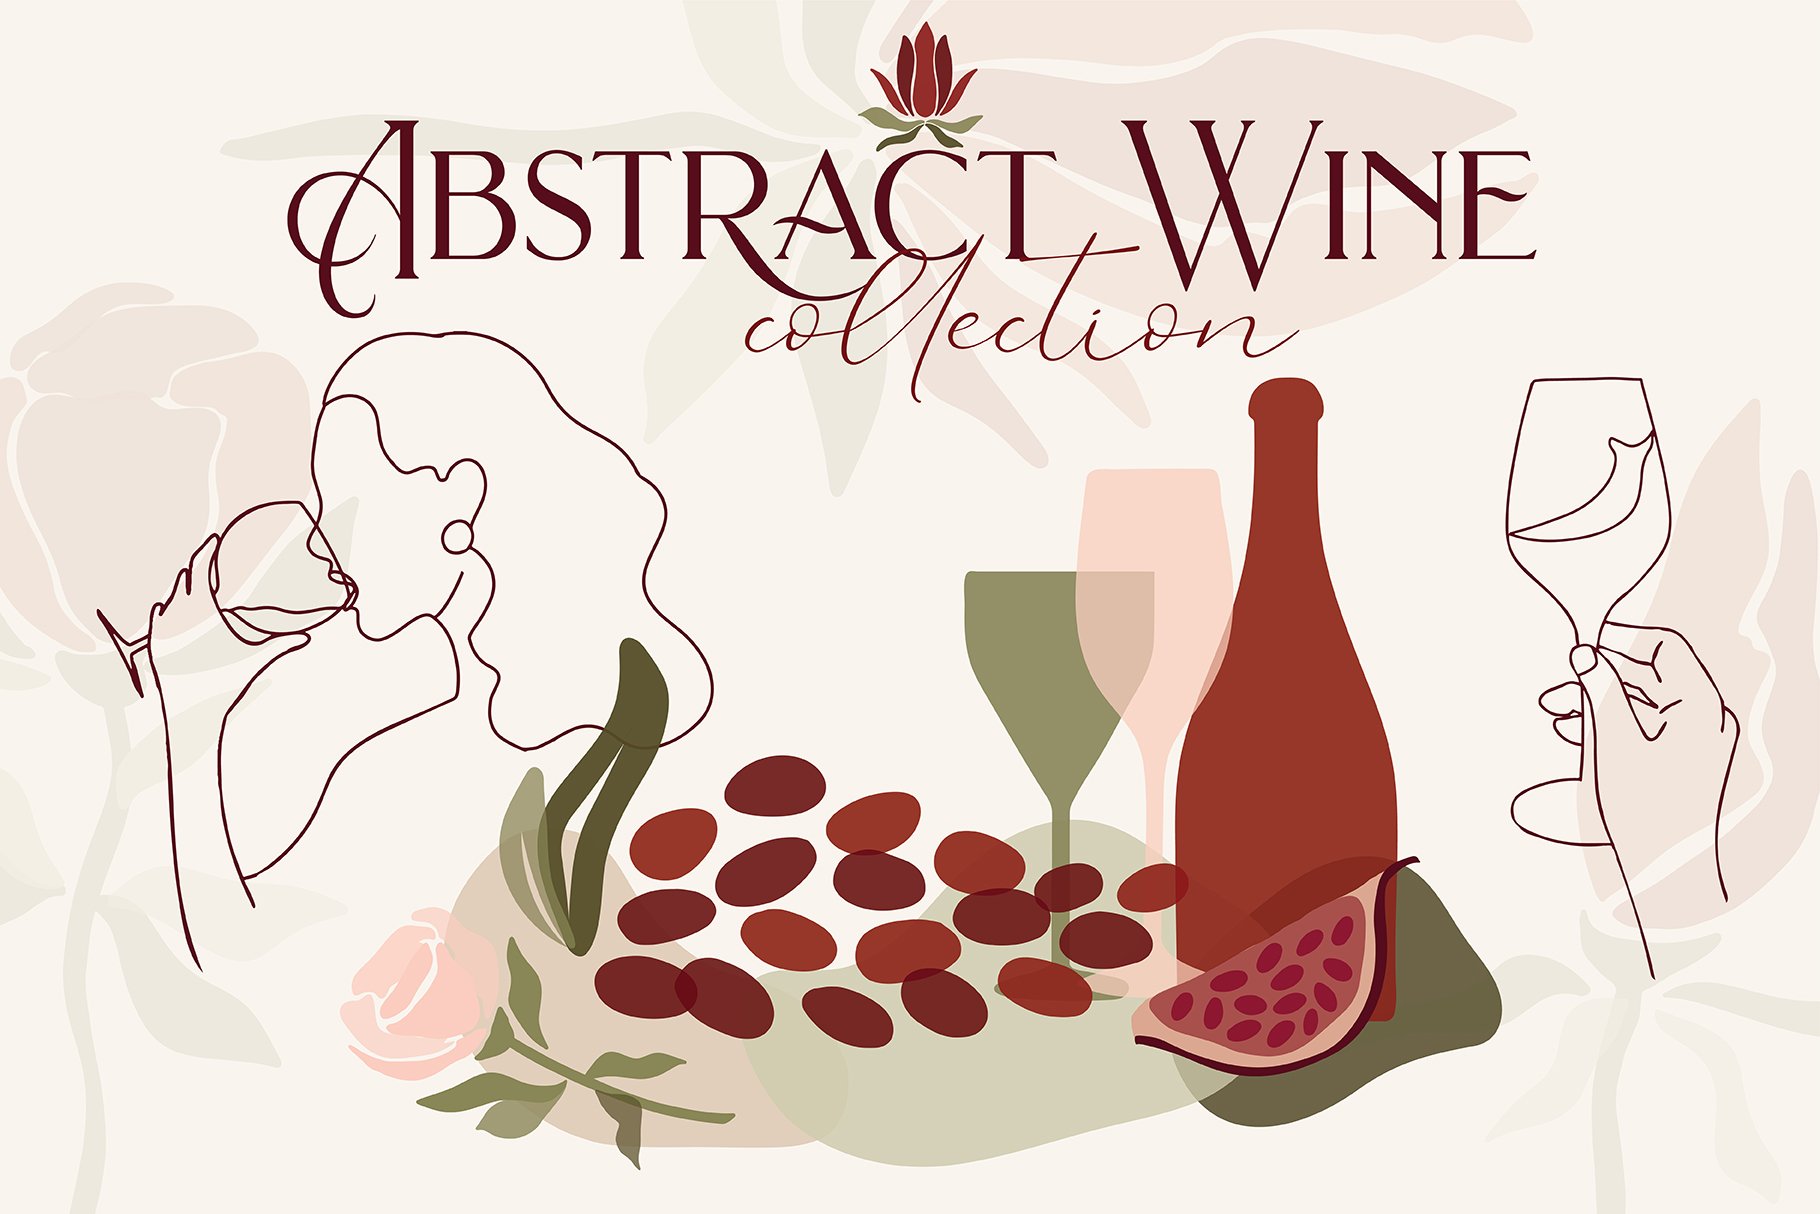 Abstract Wine Collection. BONUS! cover image.